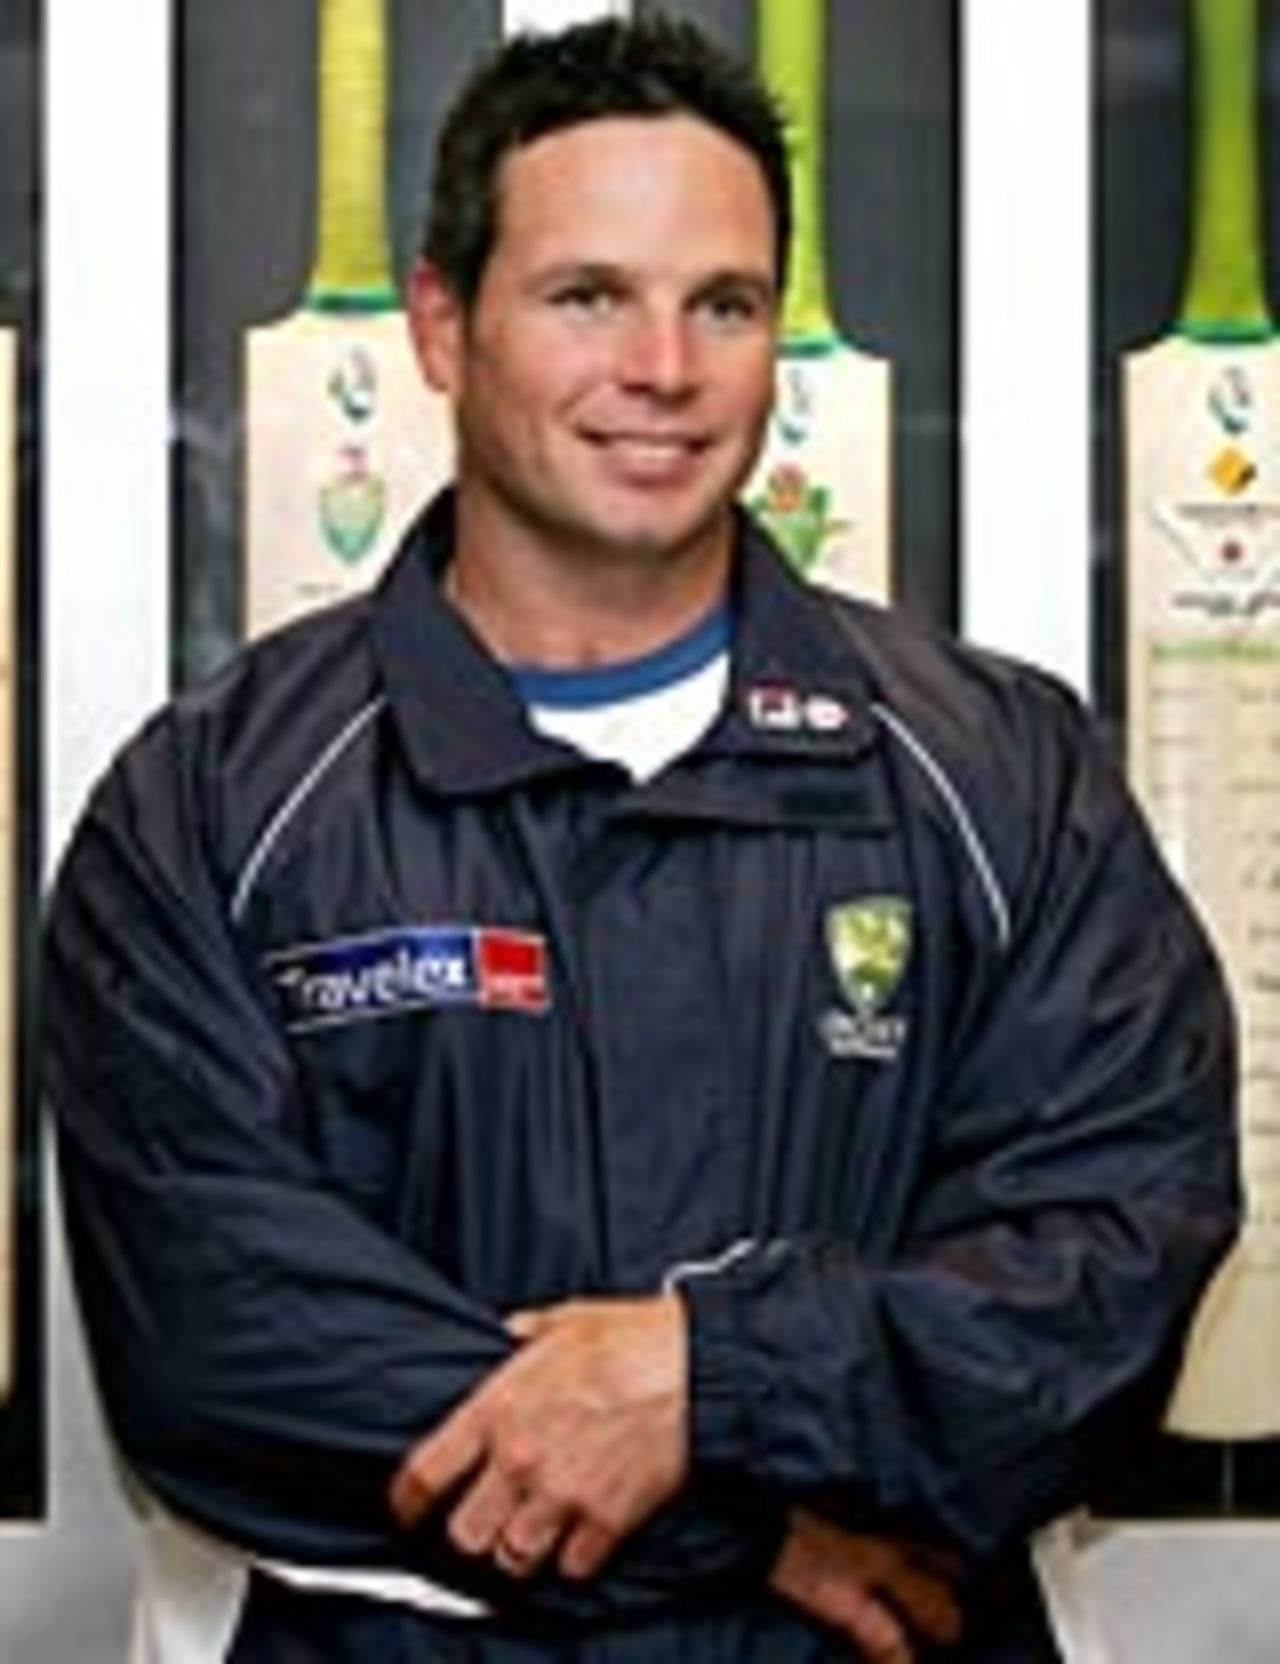 Brad Hodge smiles as he answers questions at the Australian Cricket Board offices before departing to join the Australian team for their tour of India, Melbourne, September 24, 2004